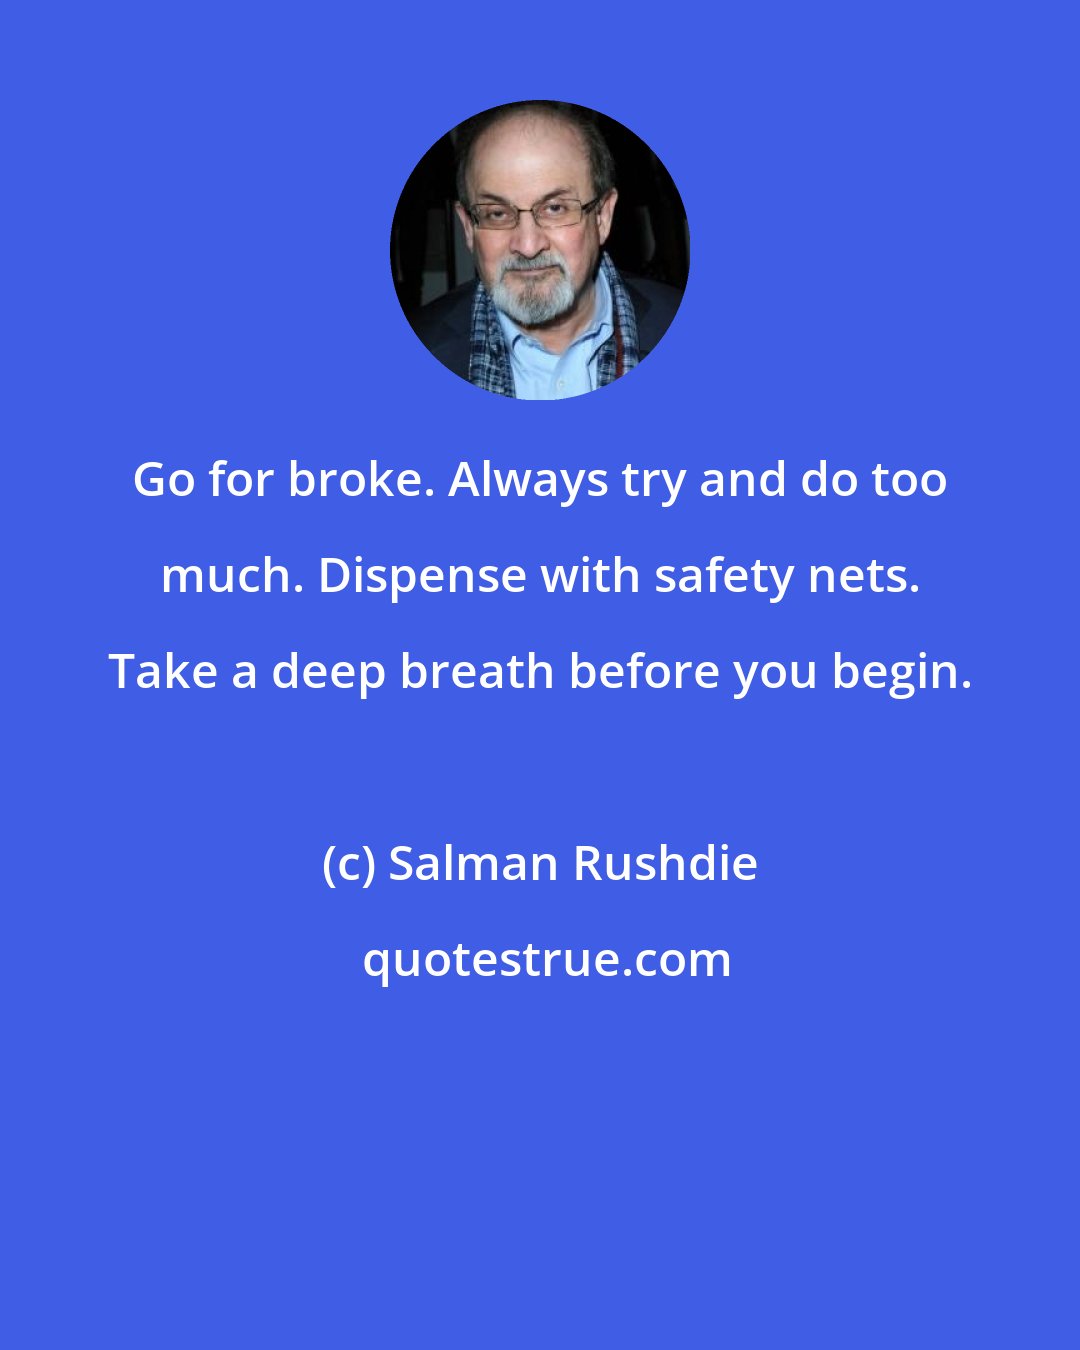 Salman Rushdie: Go for broke. Always try and do too much. Dispense with safety nets. Take a deep breath before you begin.